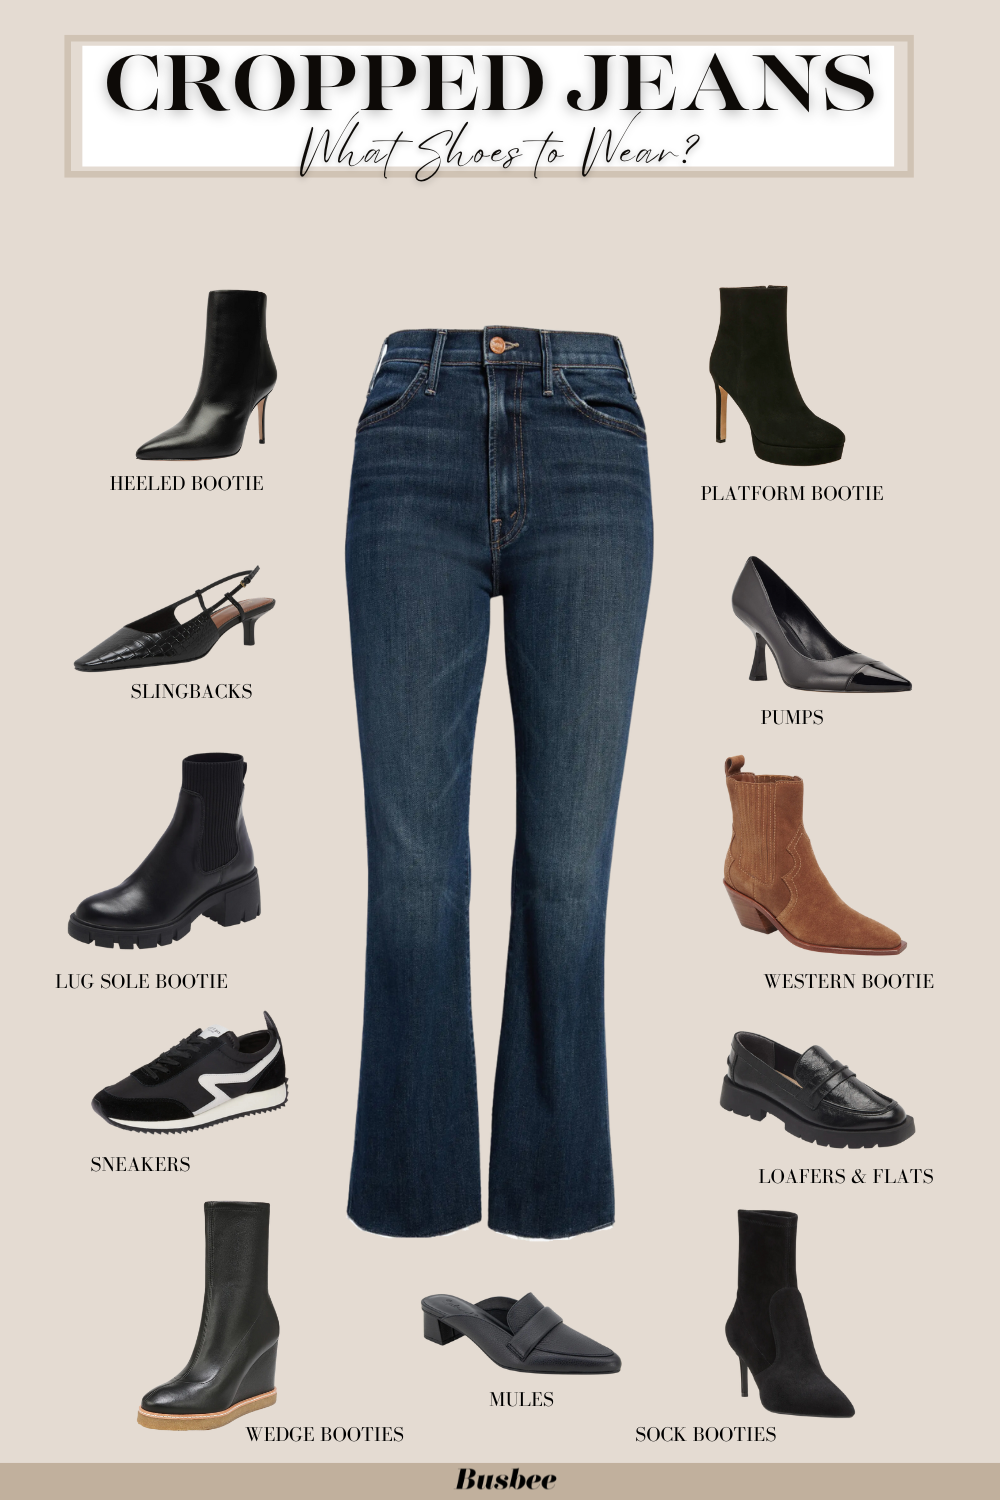 What shoes and boots to wear with cropped jeans